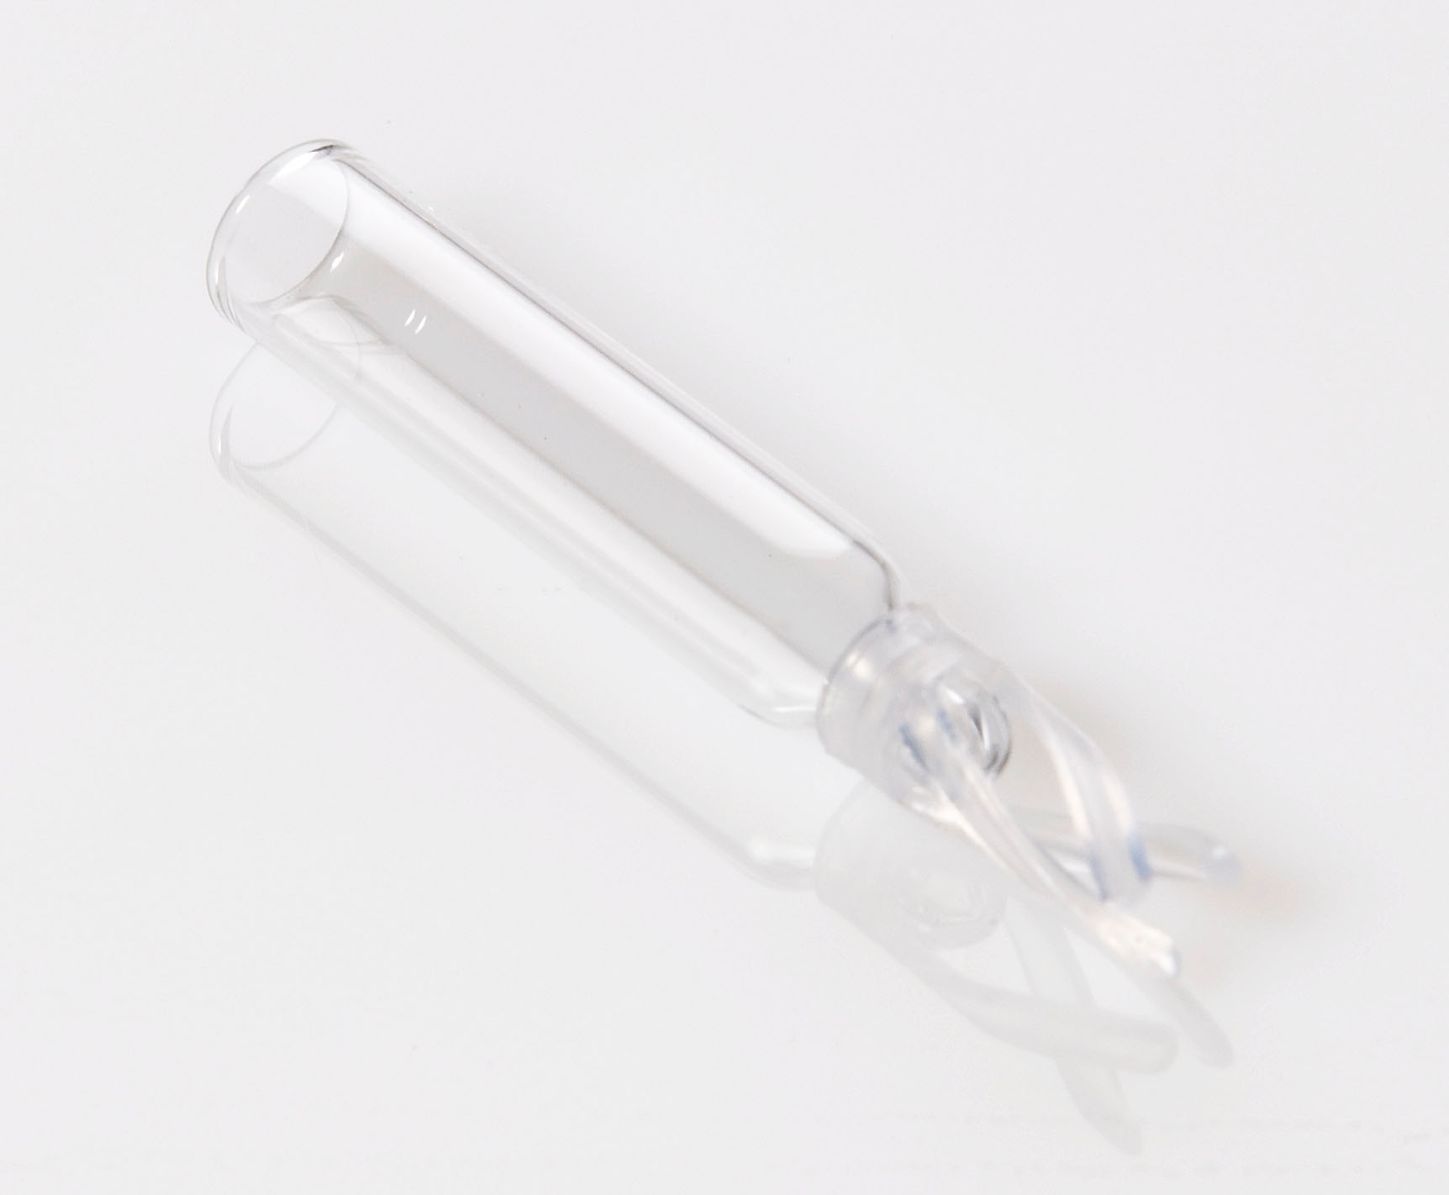 Insert 50-300uL Clear Glass Bottom Spring (6x29mm) Wide Mouth Silanized Deactivated, 100/pk